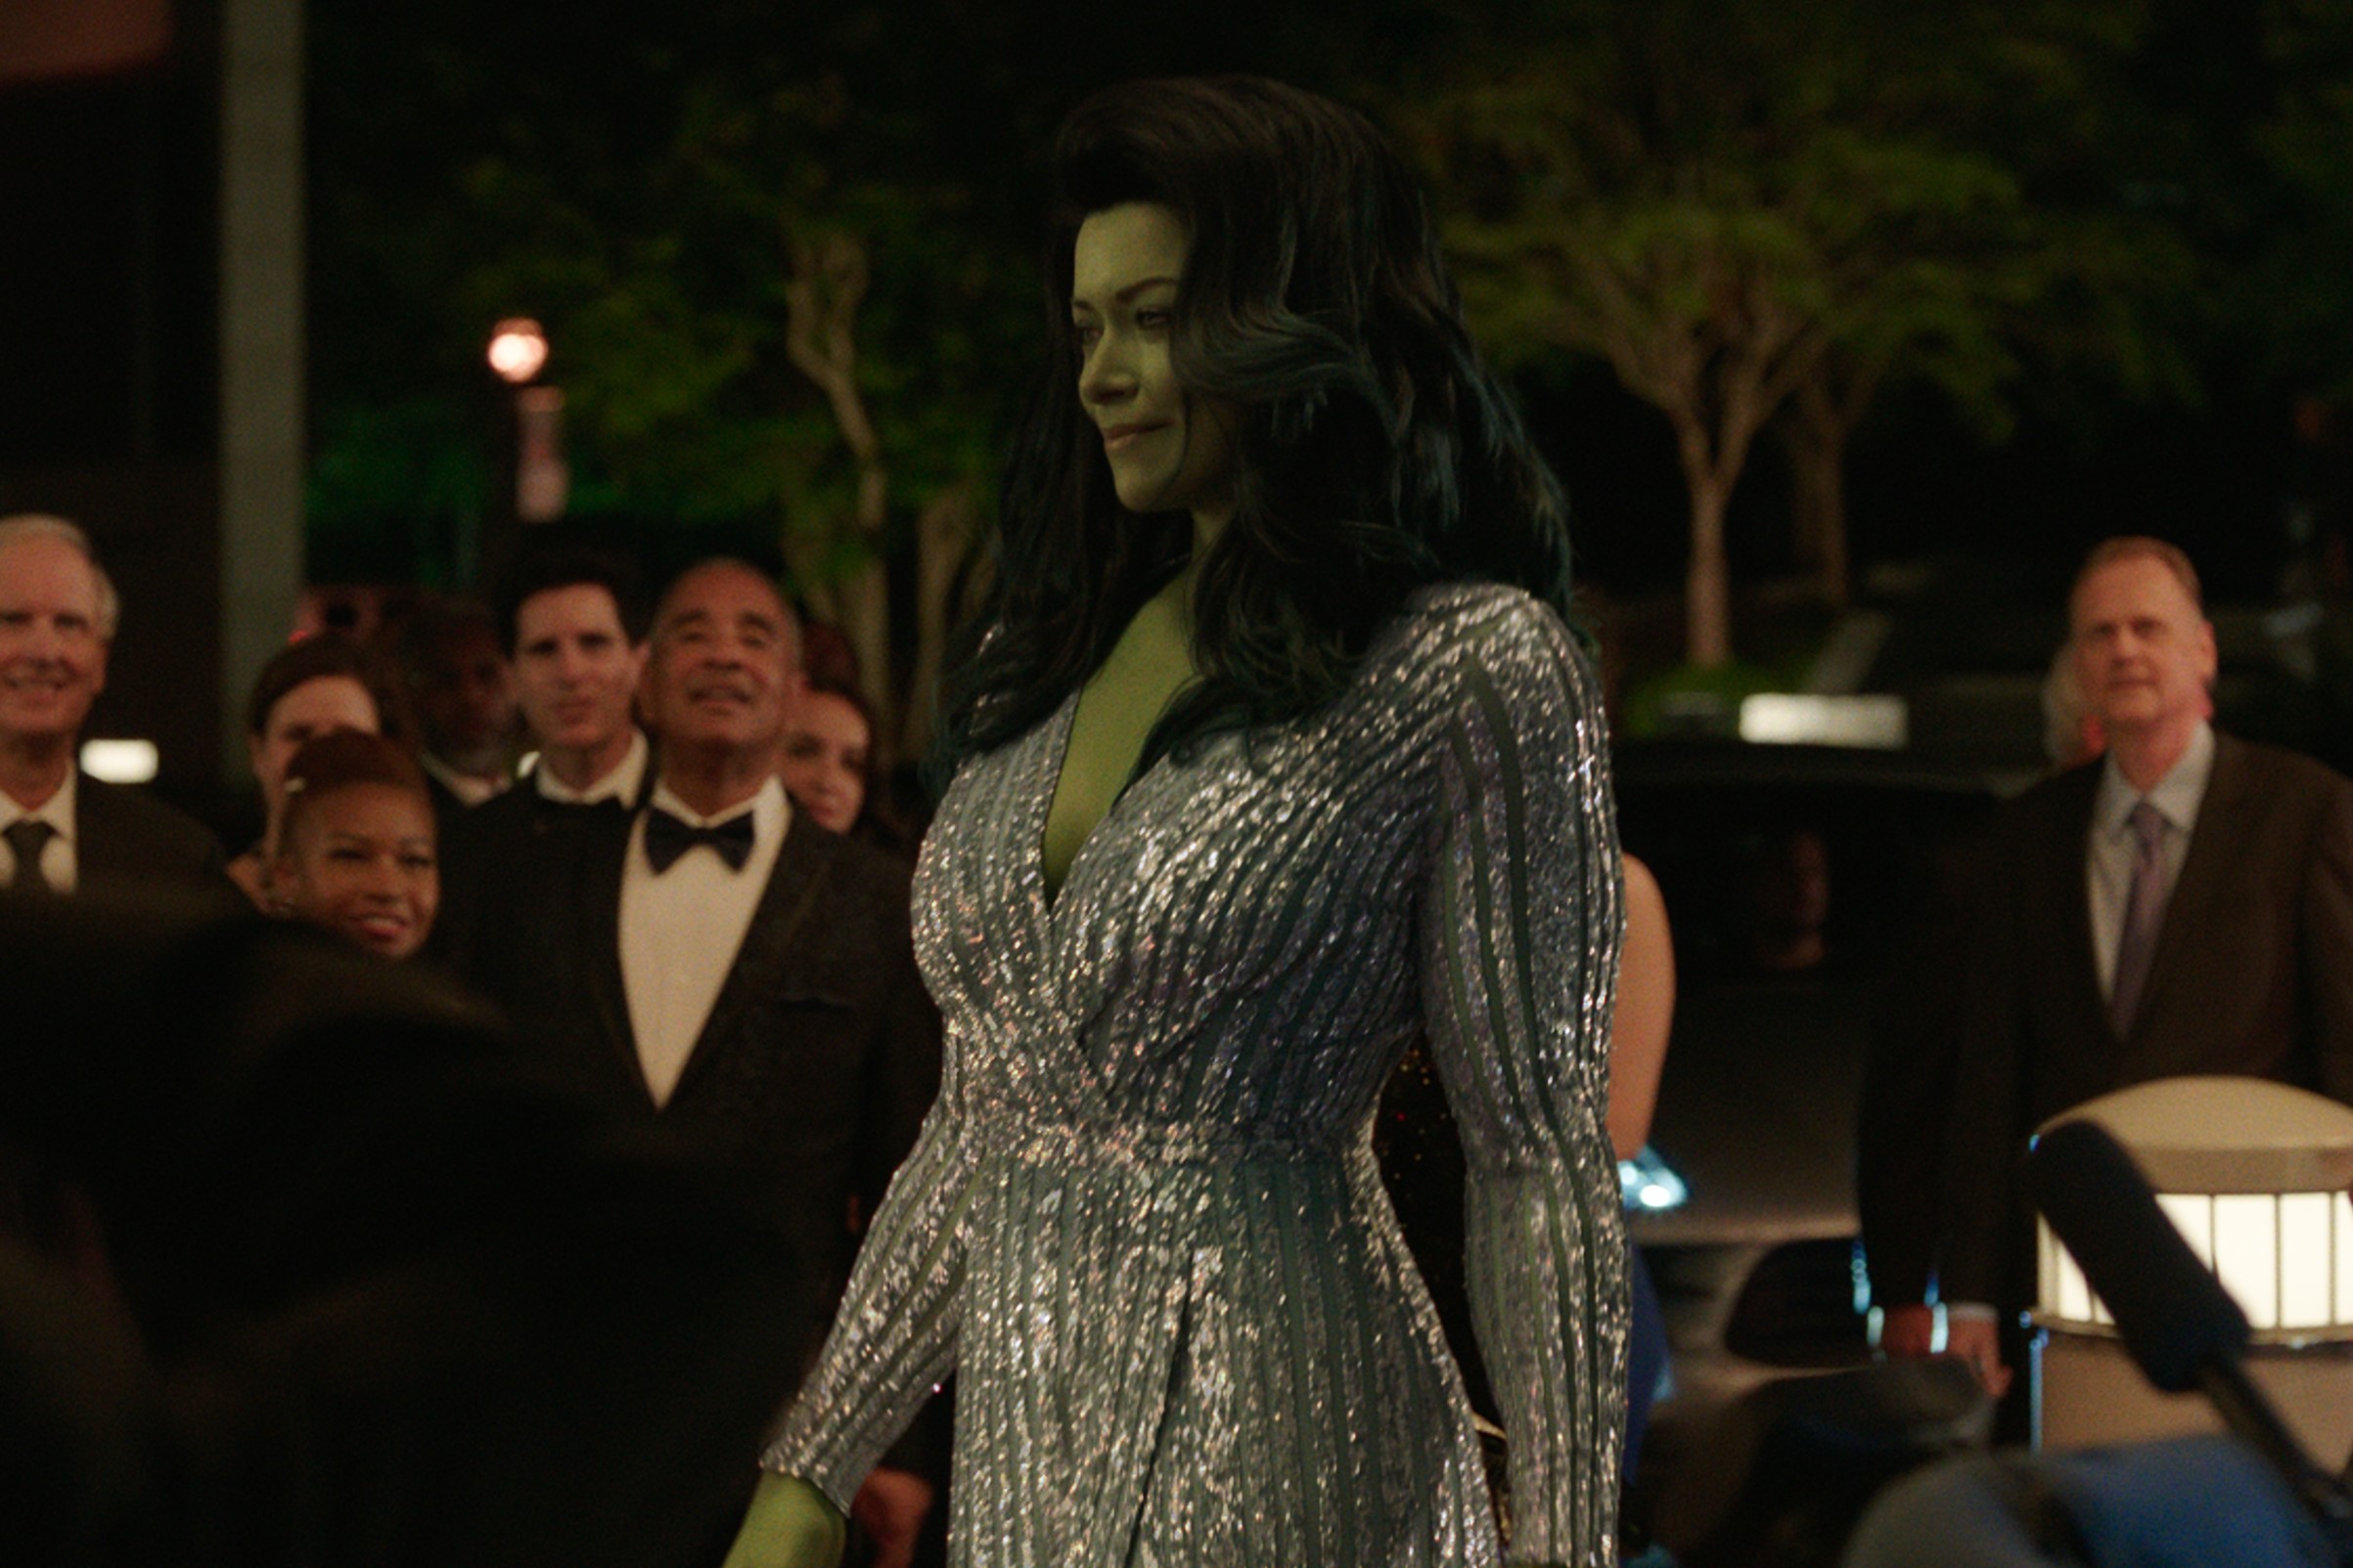 Tatiana Maslany, in character as Jennifer Walters/She-Hulk in 'She-Hulk: Attorney at Law,' which doesn't shy away from talking about sex, wears a silver long-sleeved dress in her Hulk form.